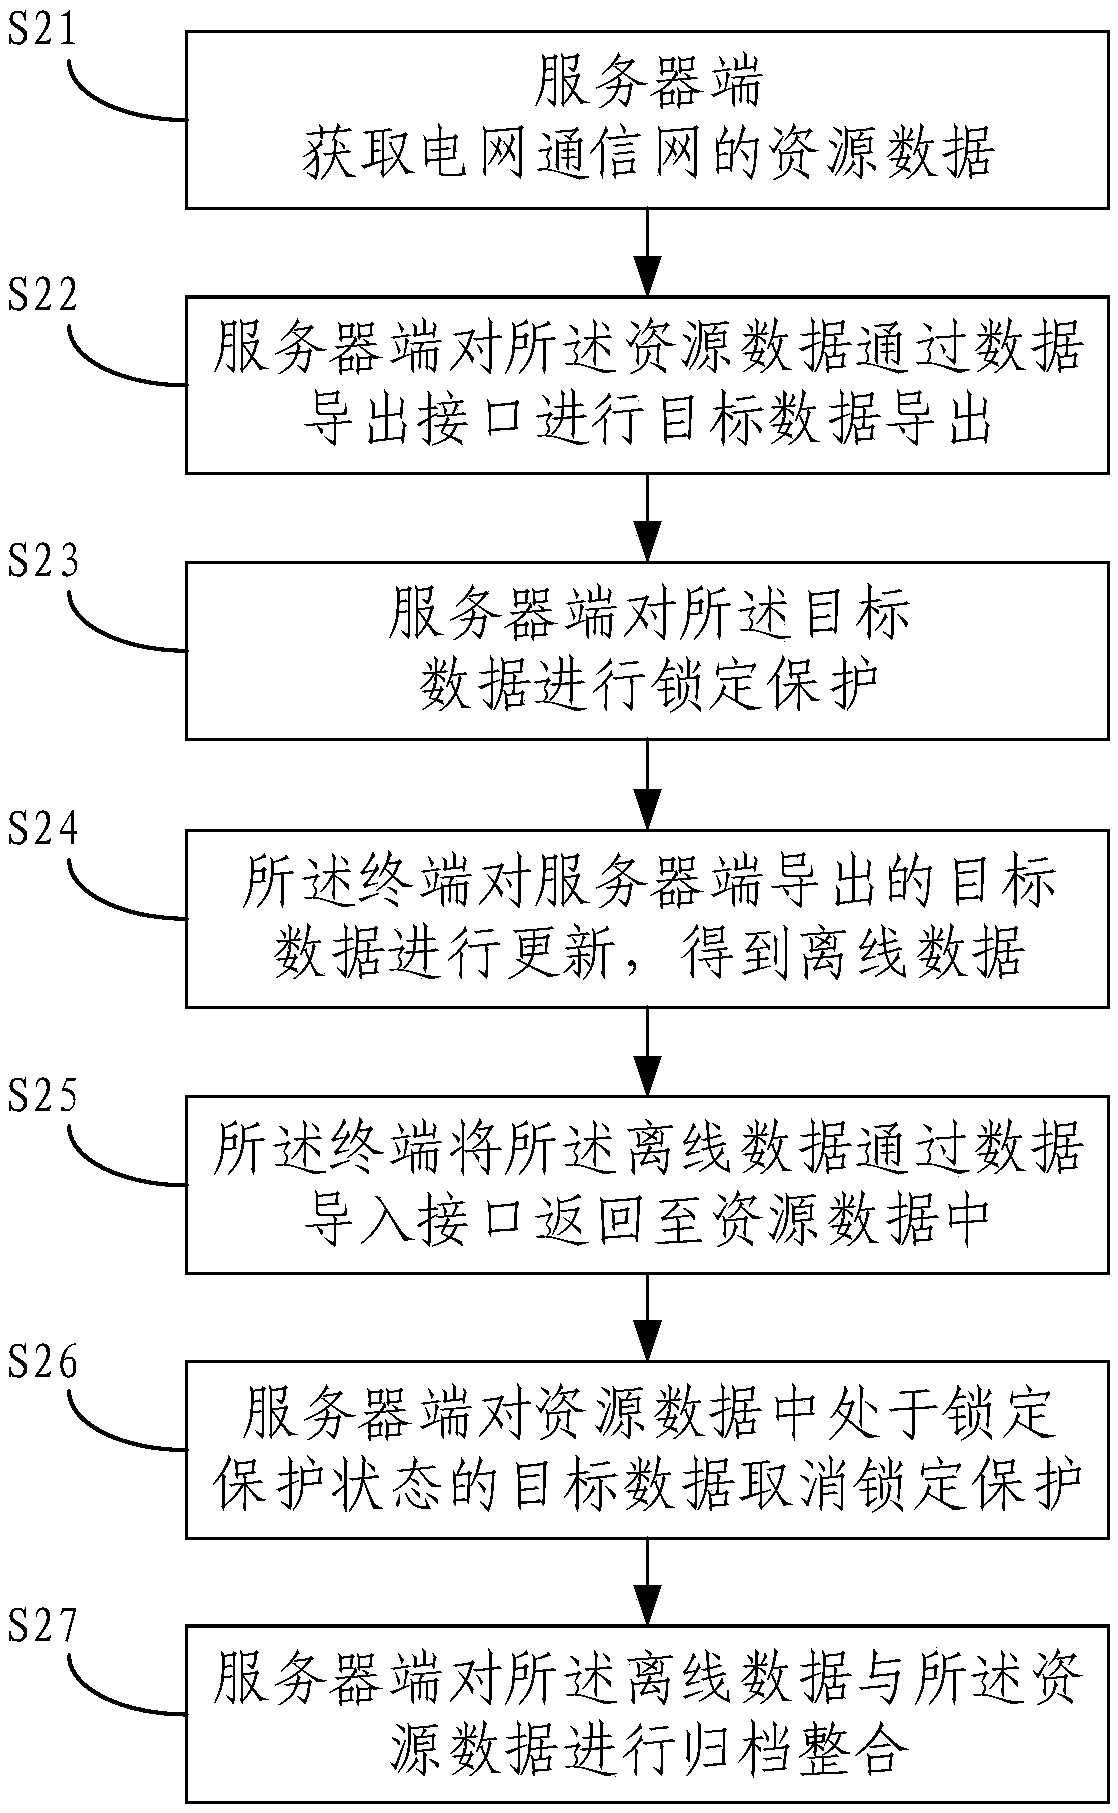 Resource data protection method and device